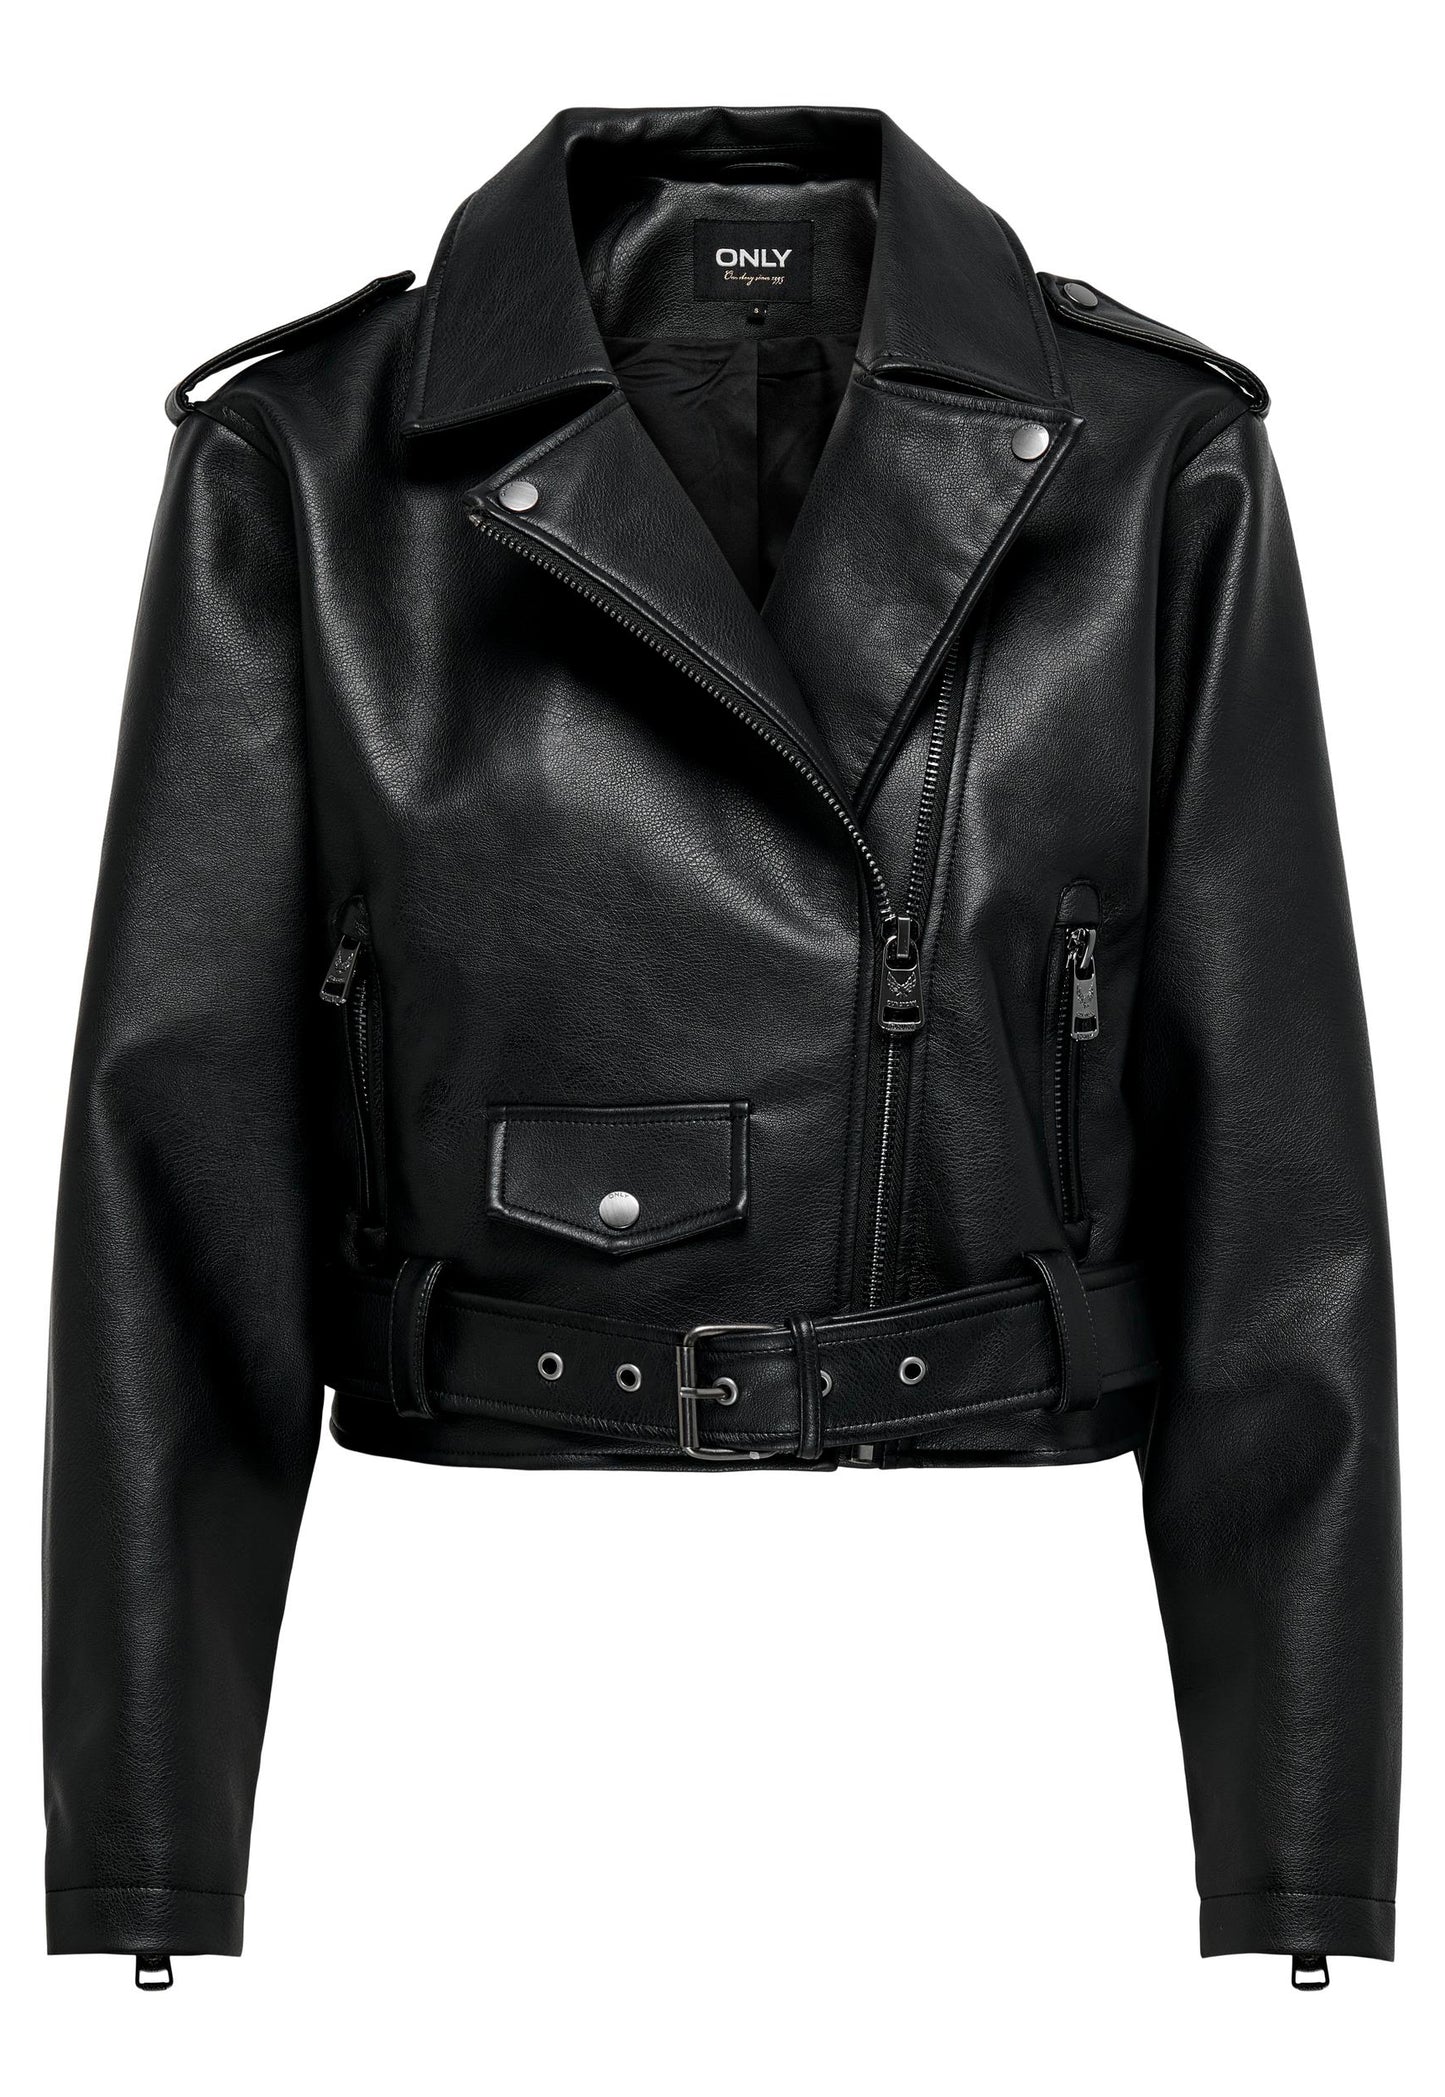 ONLY Louie Cropped Classic Faux Leather Biker Jacket with Belt in Black - One Nation Clothing